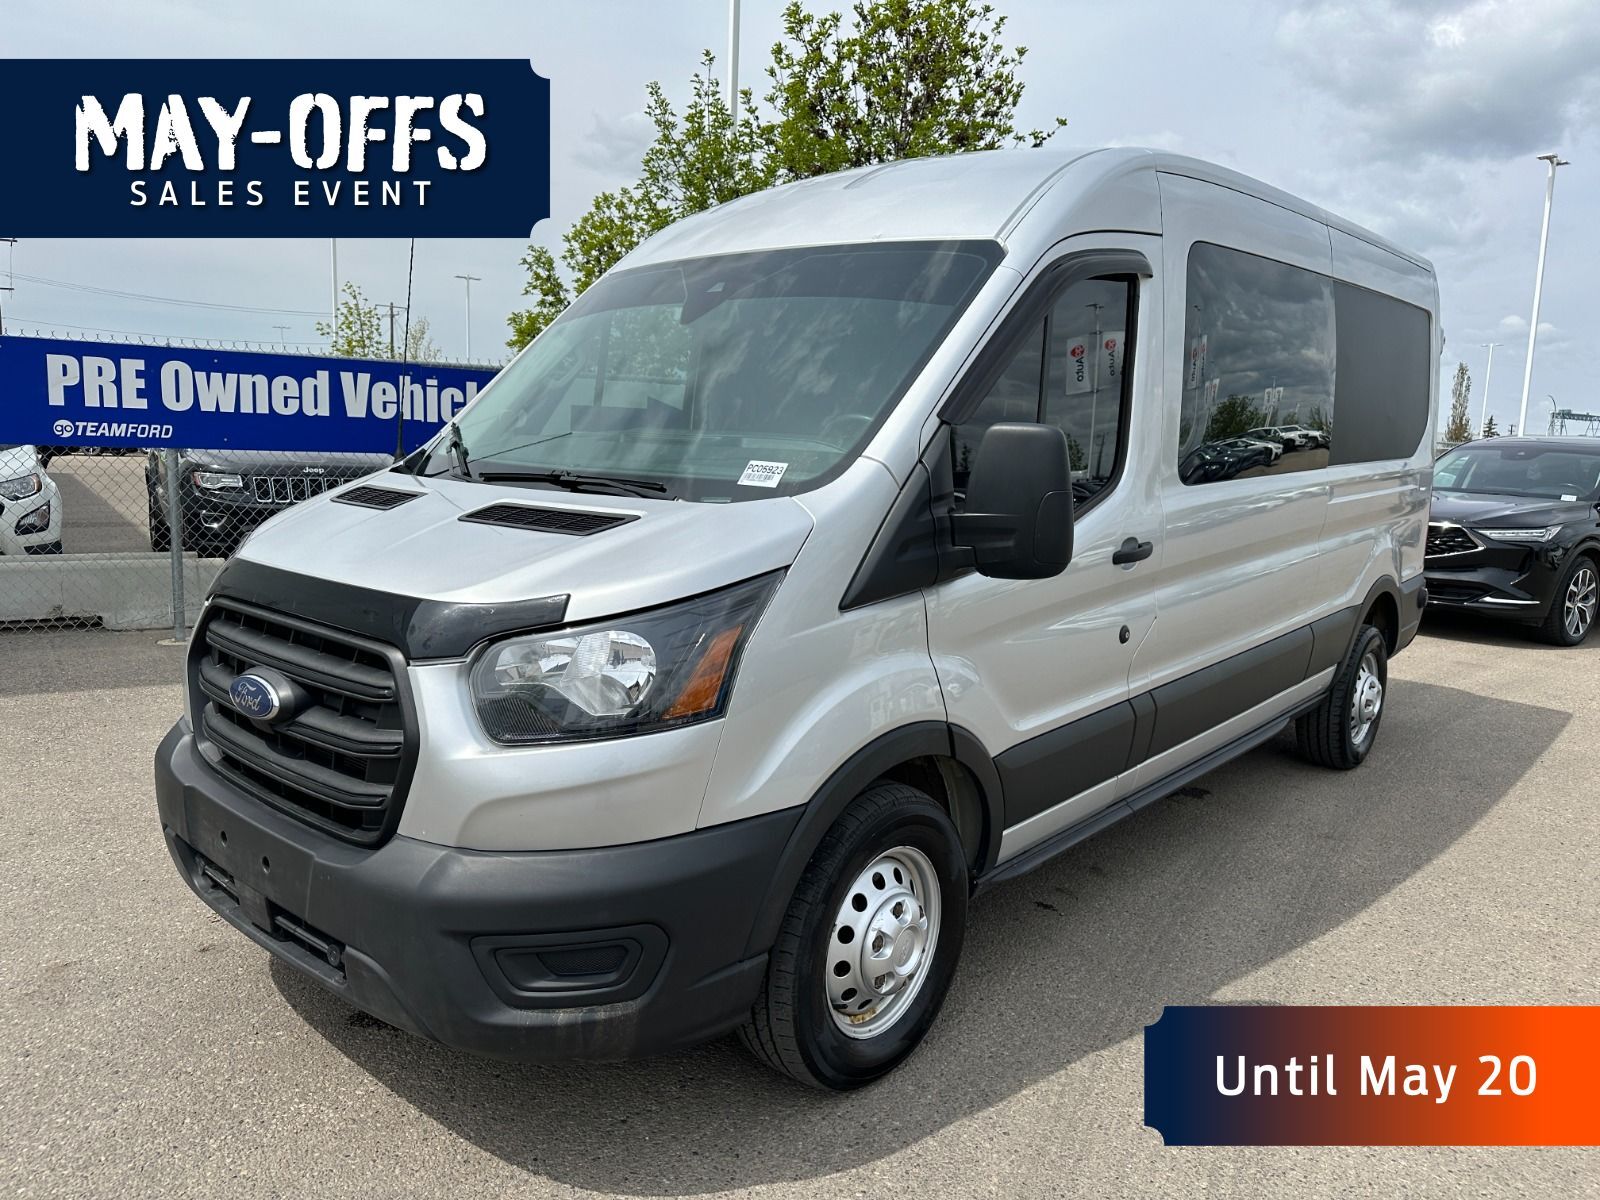 2020 Ford Transit Crew Van 3.5L V6 ECOBOOST ENG, CRUISE CONTROL, REVERSE CAME